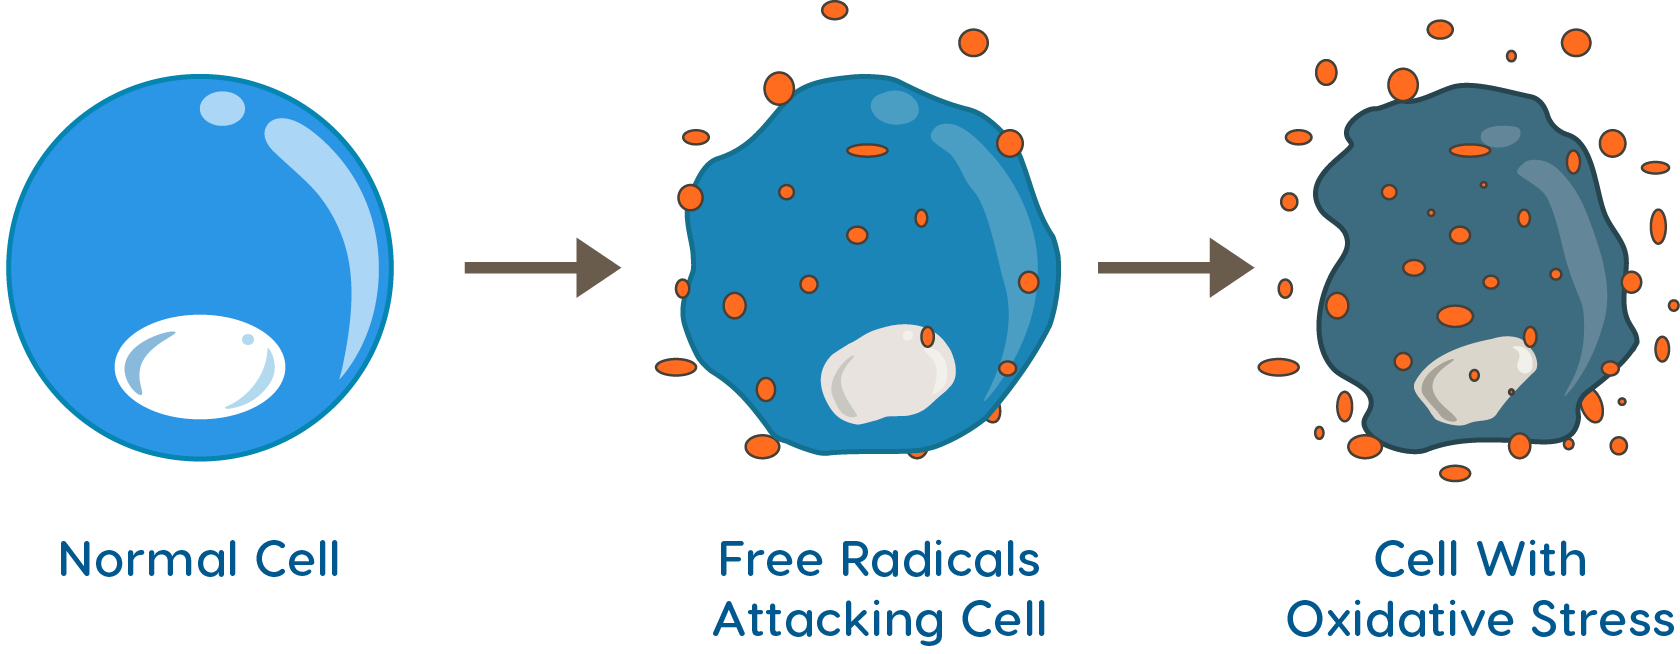 Diagram illustrating a normal cell, free radicals attacking cell, and cell with oxidative stress